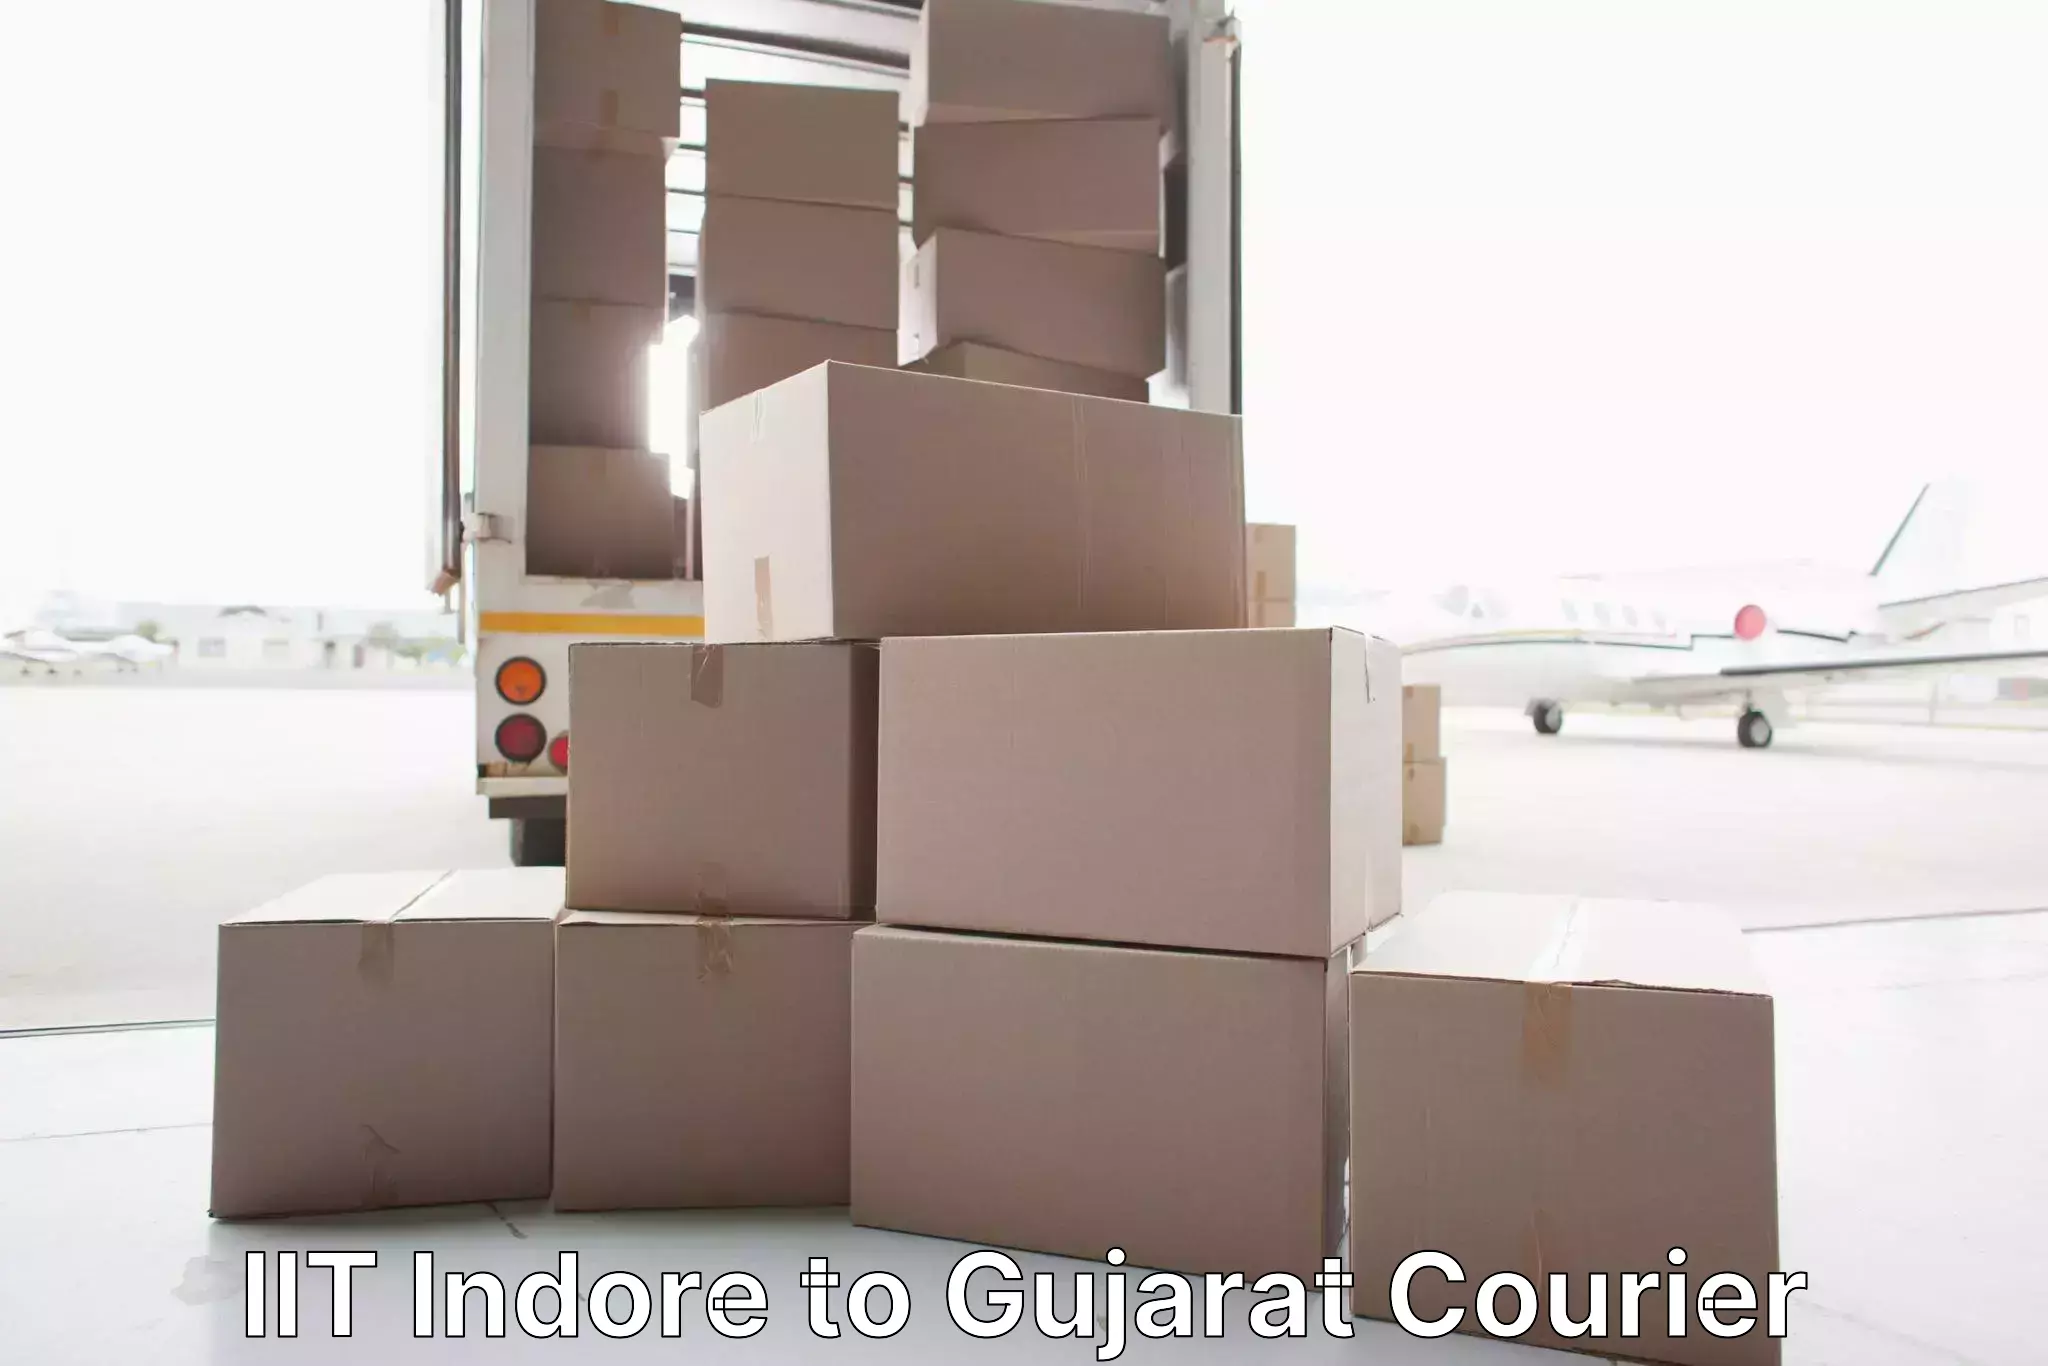 Furniture transport company IIT Indore to Gujarat